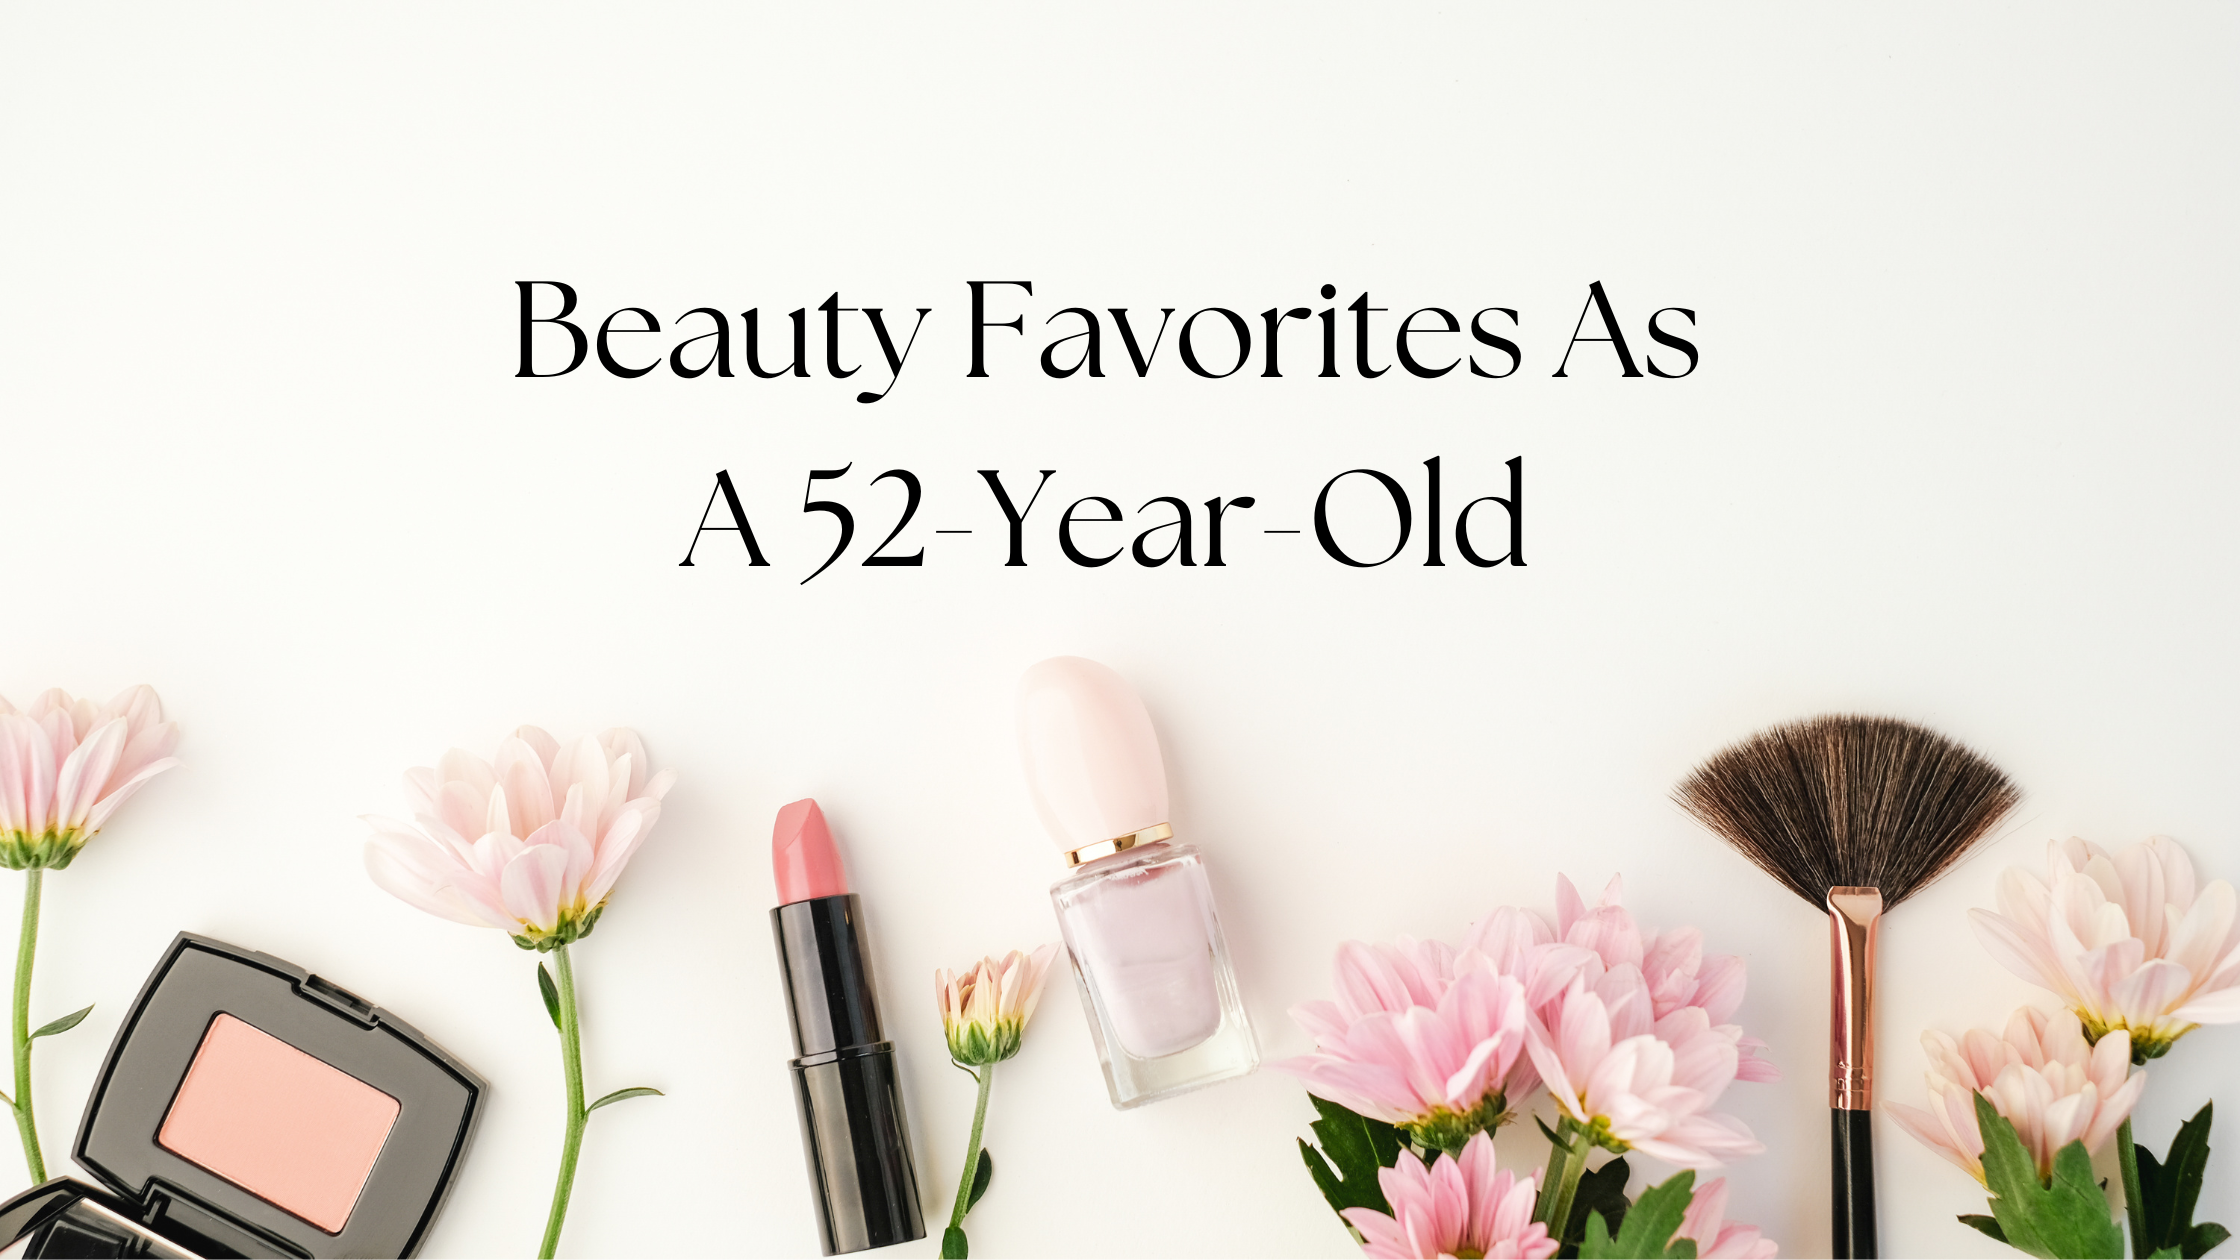 Beauty Favorites As A 52-Year-Old